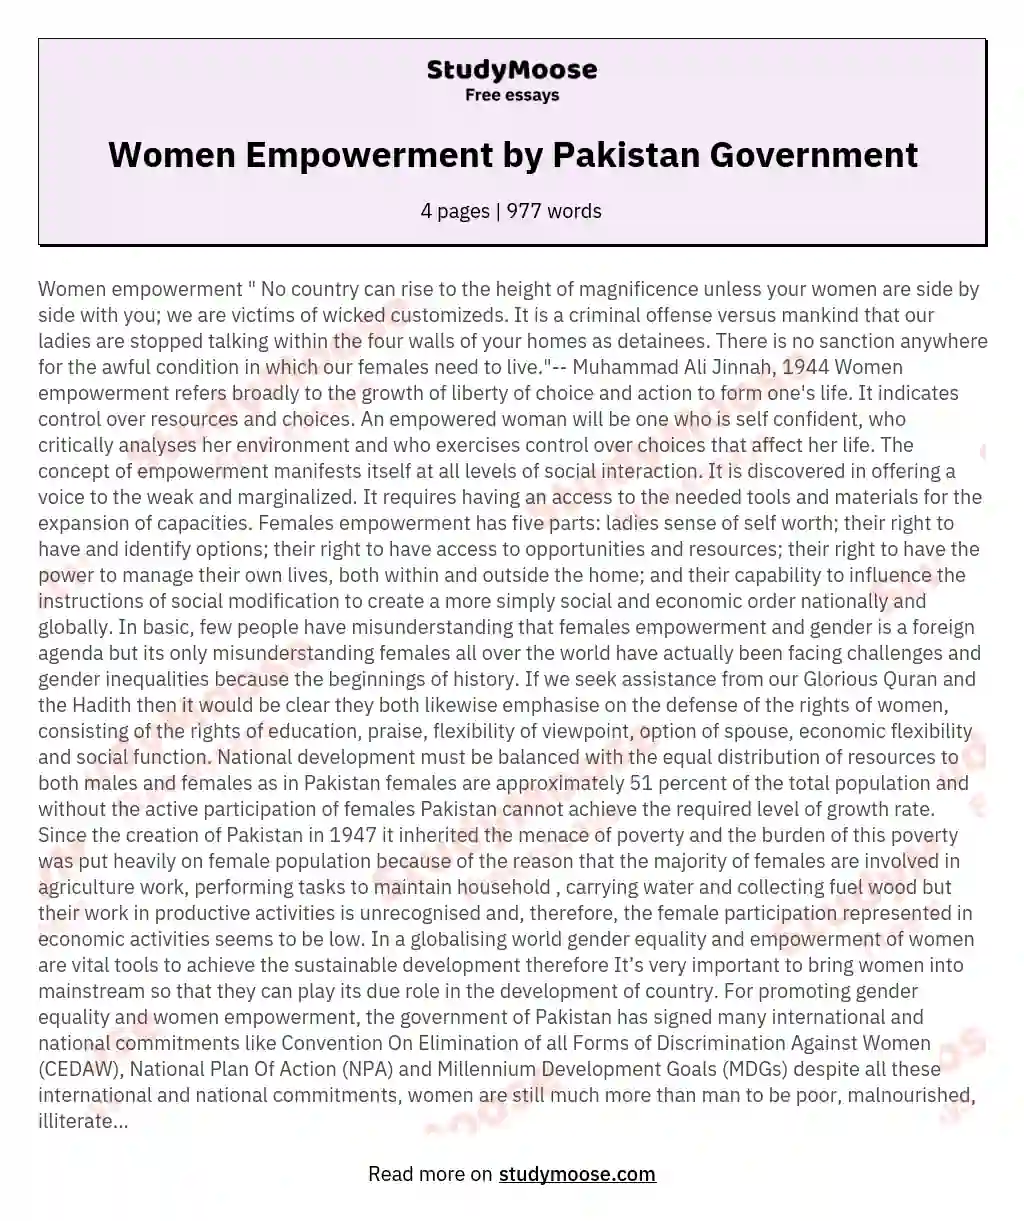 Women Empowerment by Pakistan Government